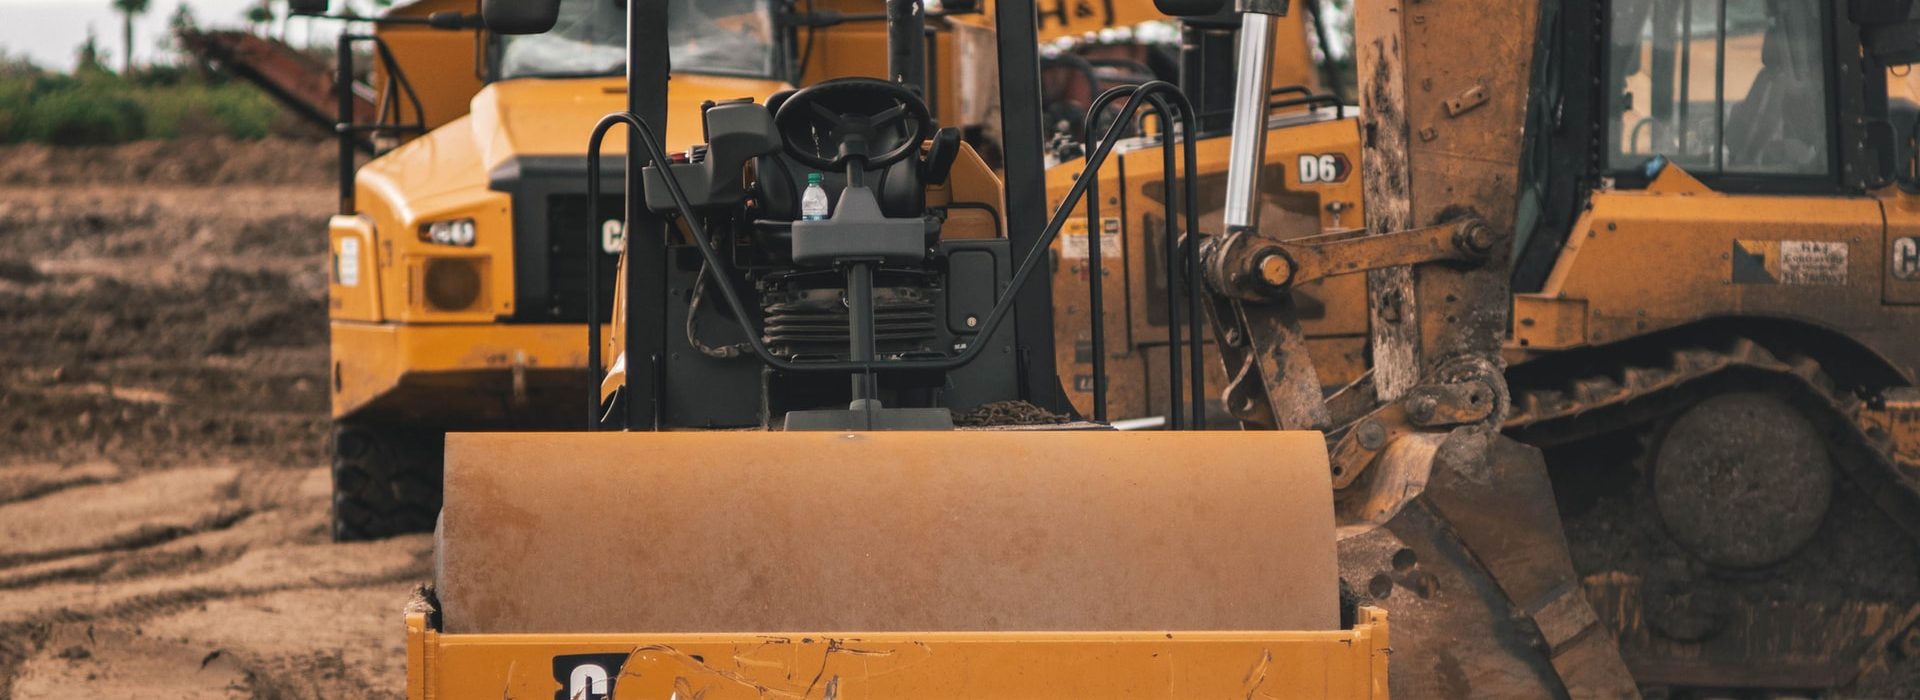 Everything You Need to Know about Rental of Construction Equipment